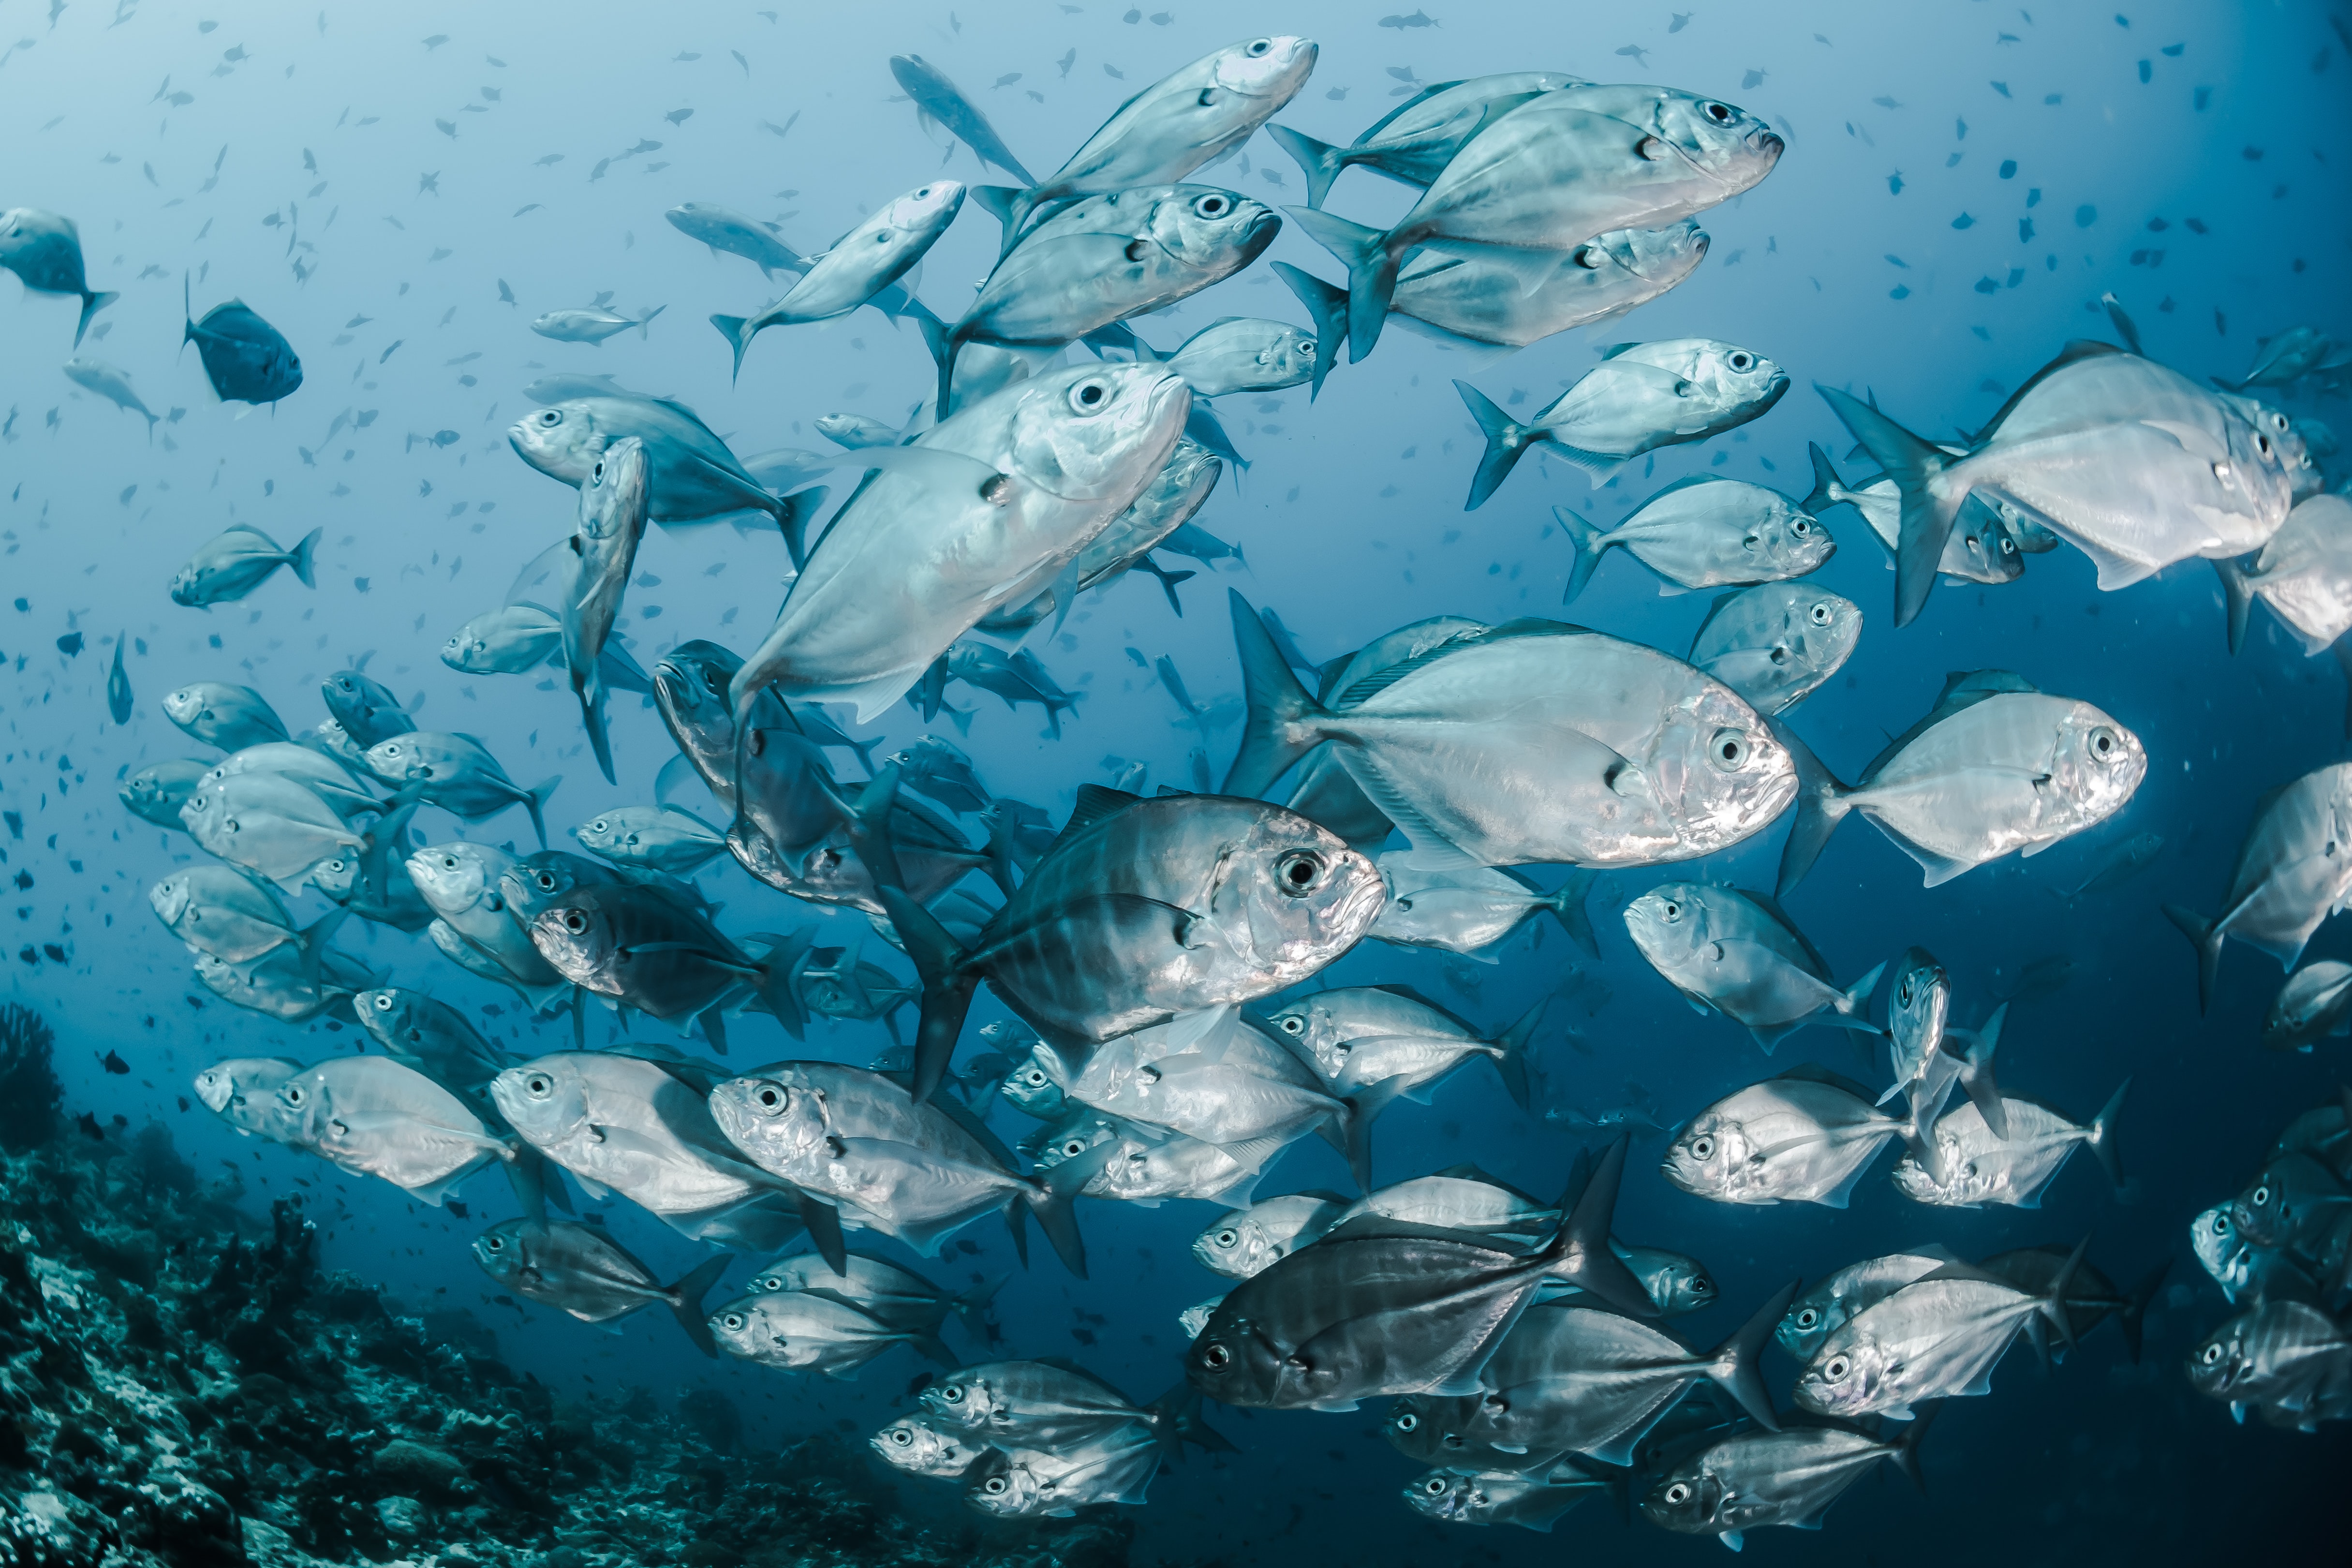 Fish and marine life - Knowledgebase - Farm Transparency Project |  Australian animal protection charity